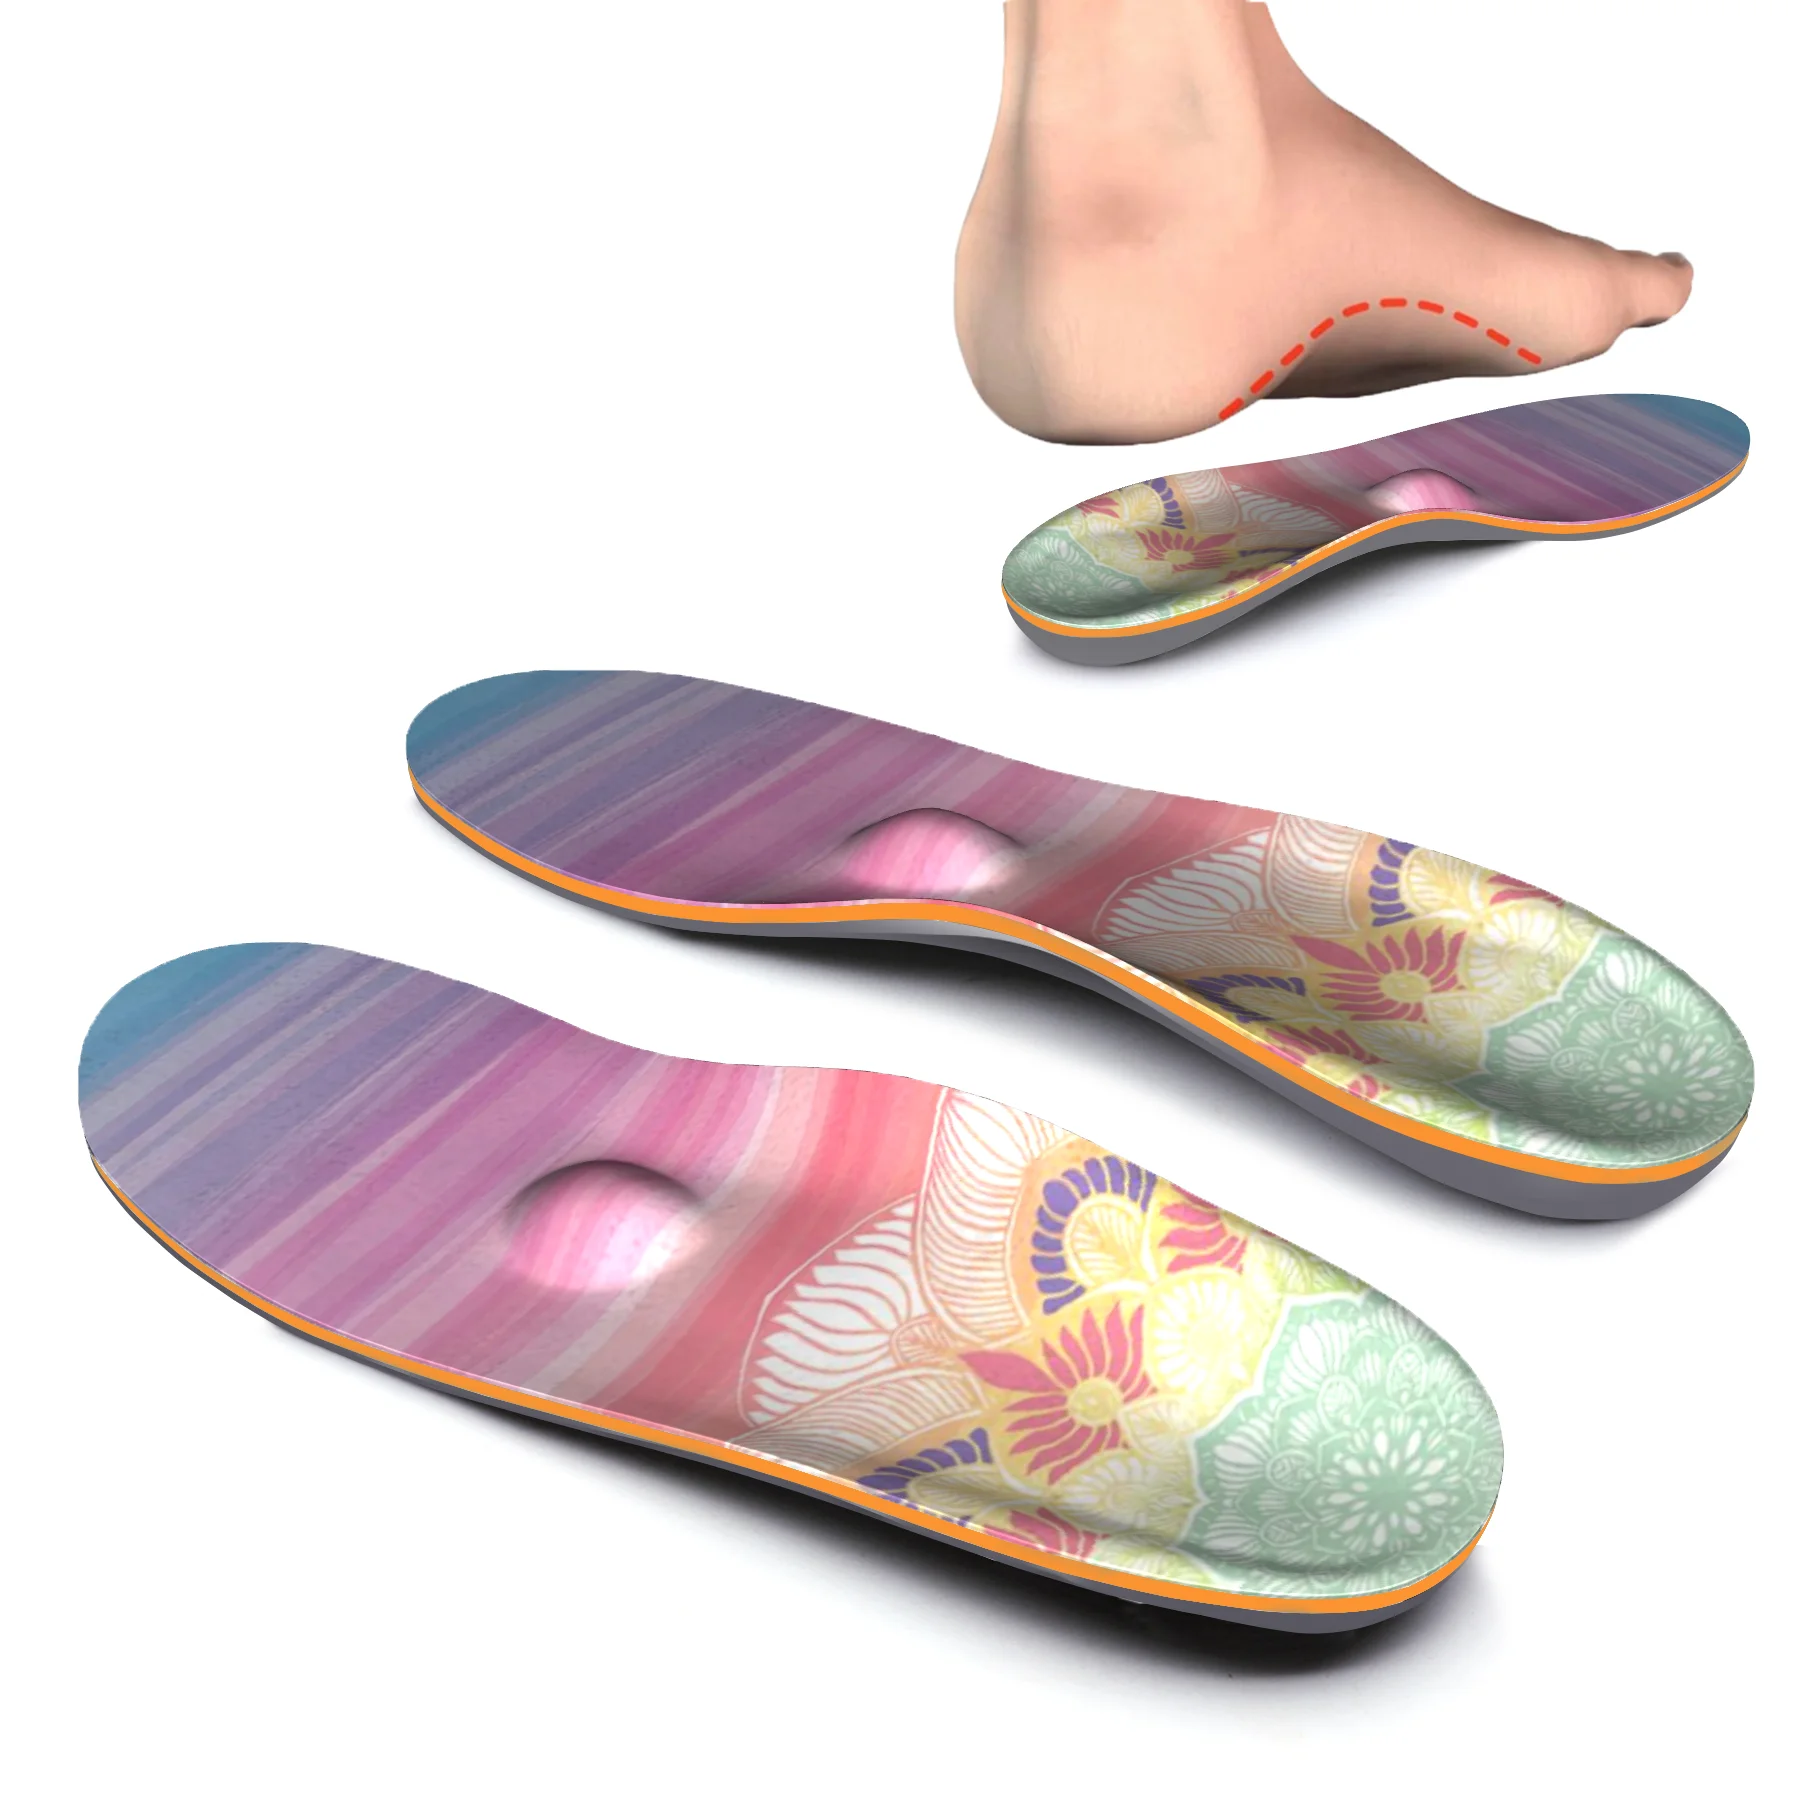 

High Arch Support Insole For Women Suitable For Running, Relax Heel Pressure,Memory Foam Orthotic Inserts Full-length